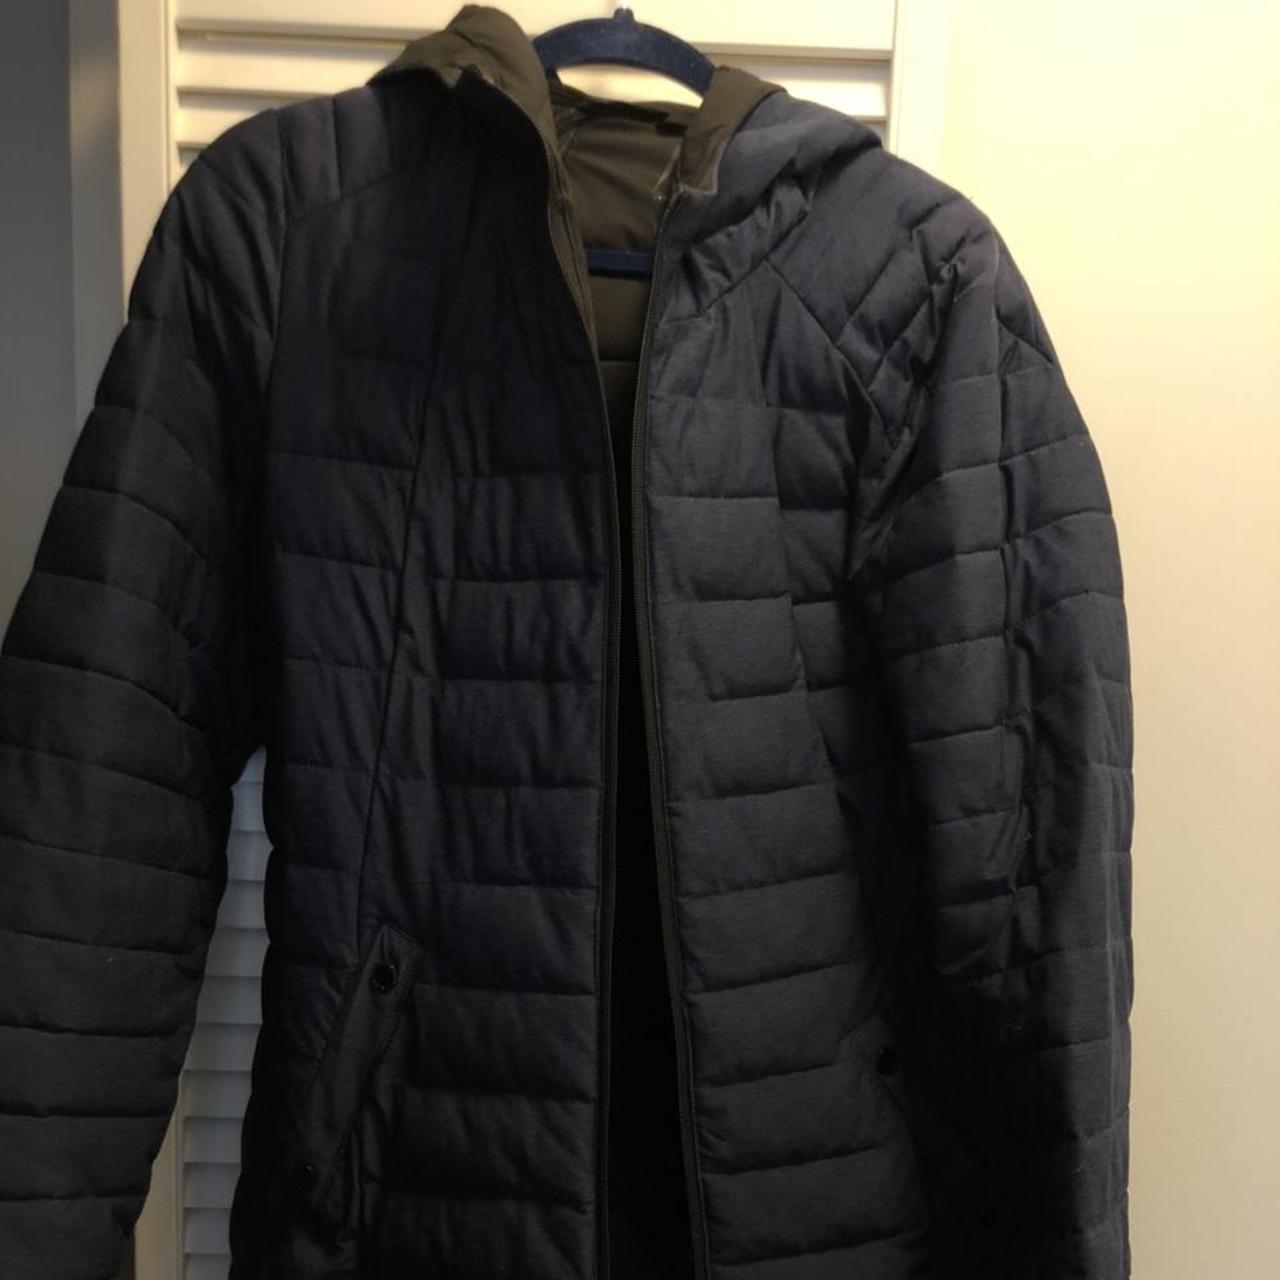 Product Image 1 - Navy Blue Down Coat! Great